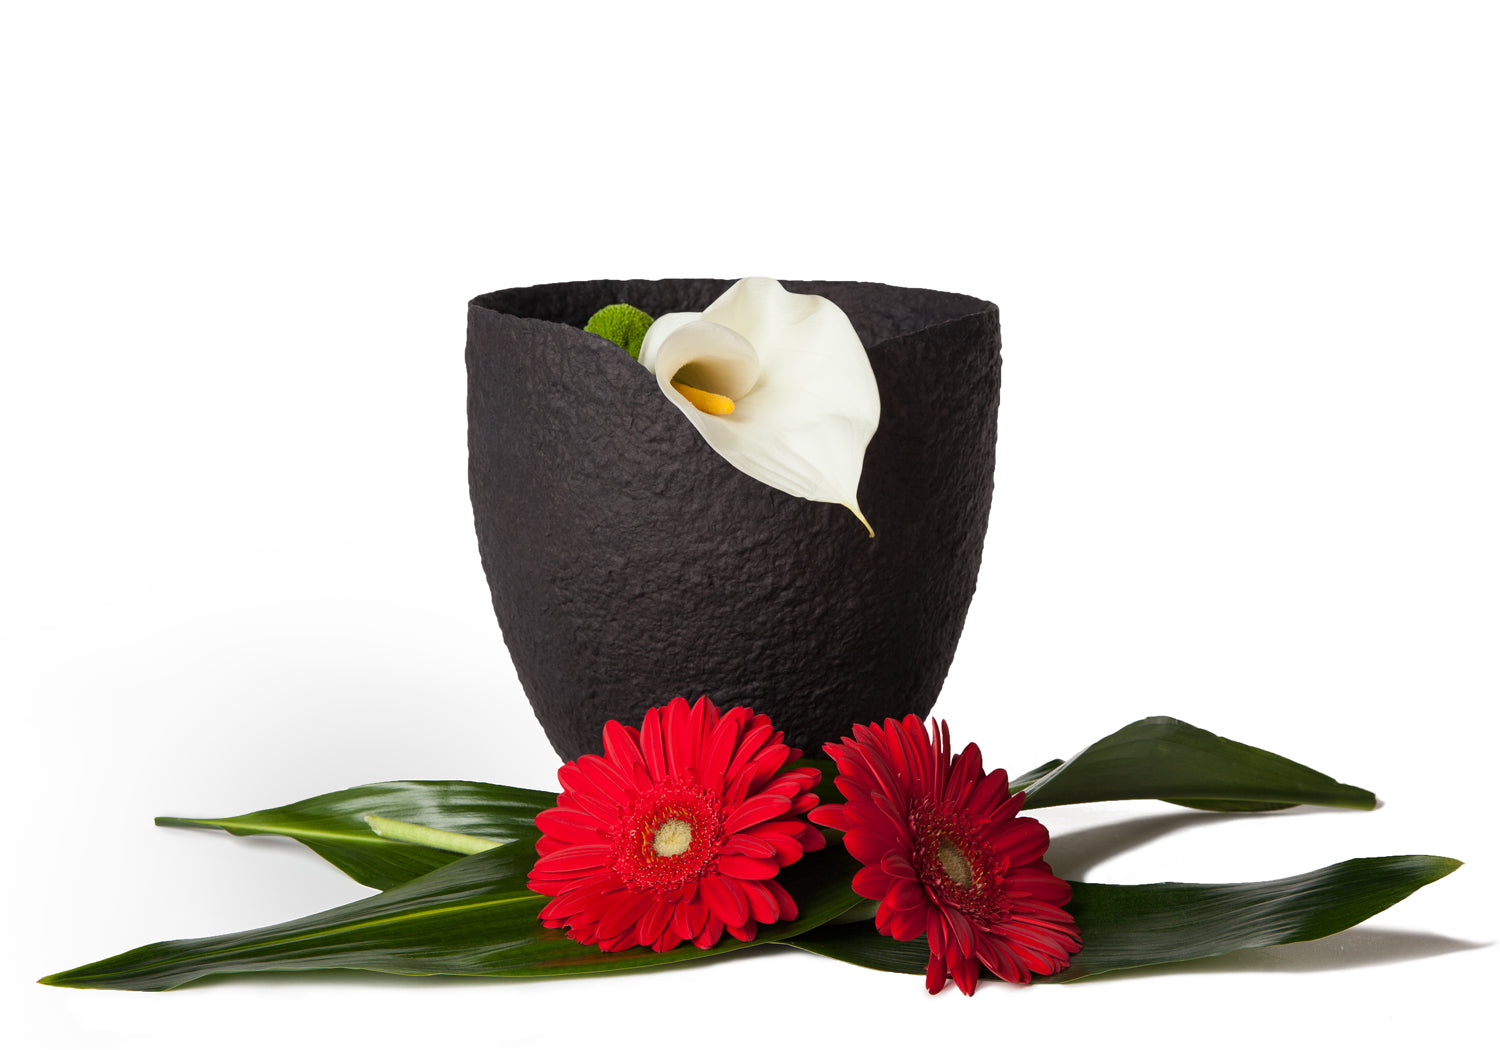 Picture of a black ovoid biodegradable cremation urn on sale at Muses Design Urns. View with flowers.